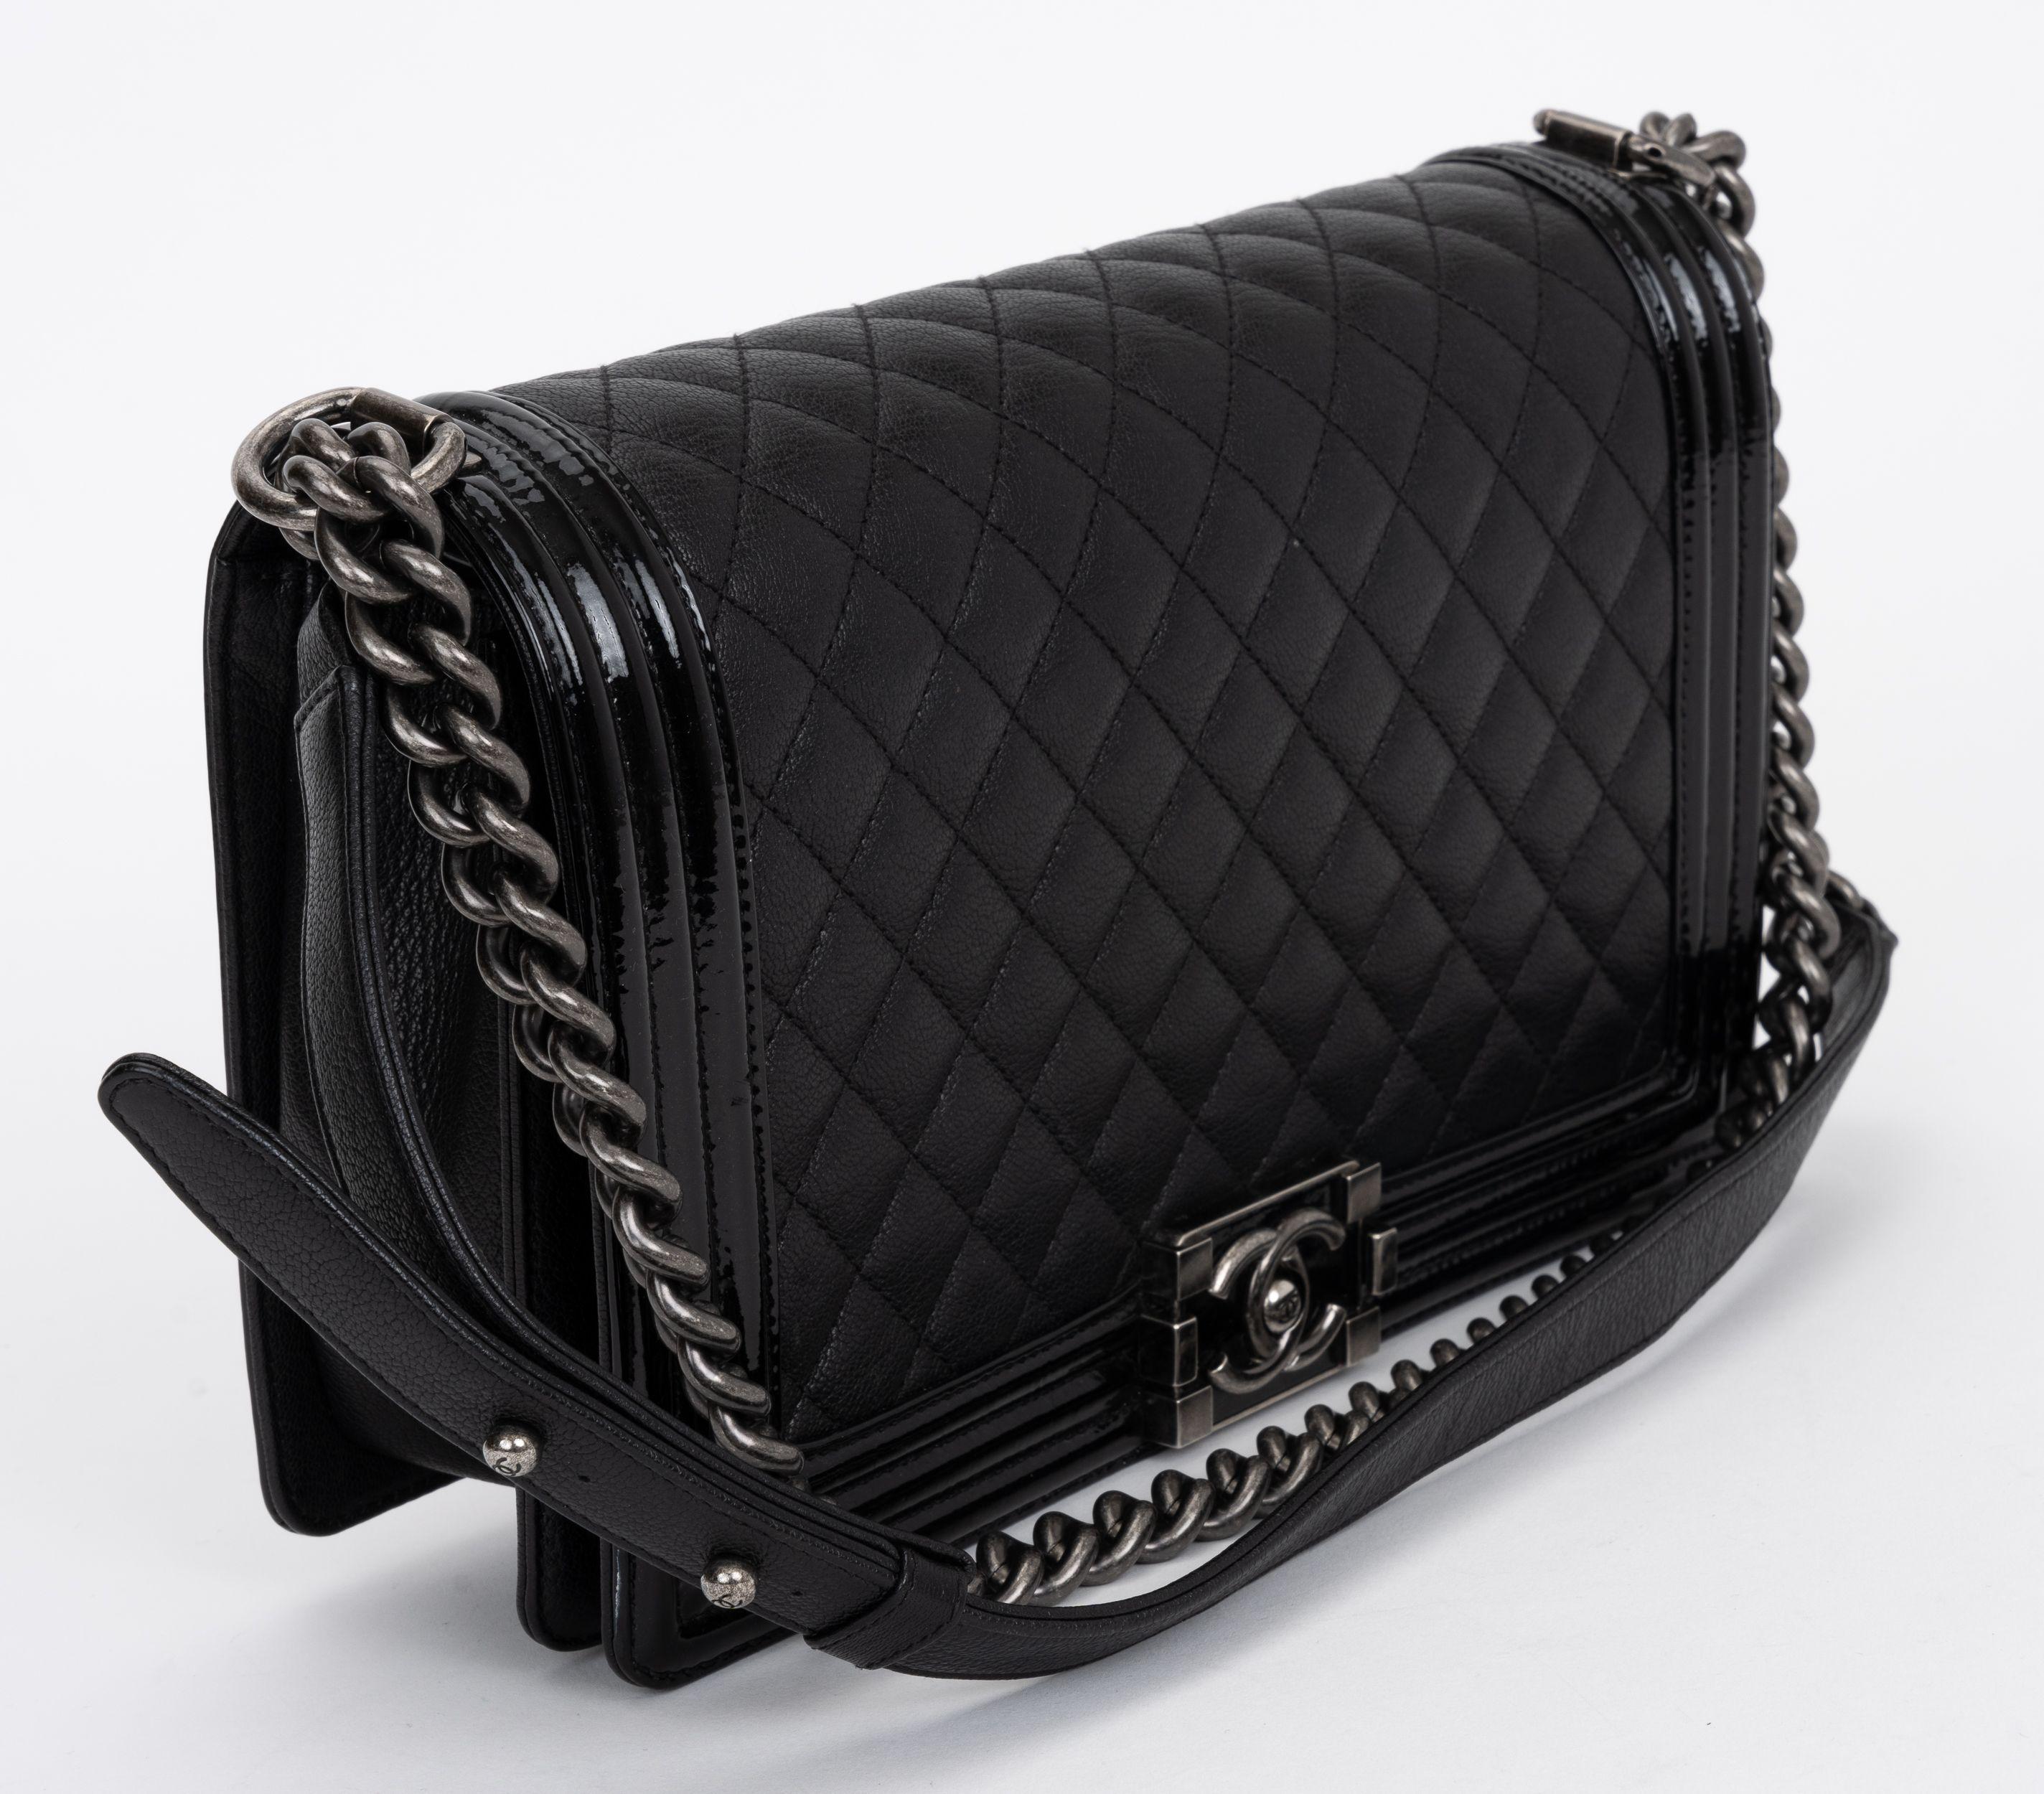 Chanel Calfskin Double Stitch Jumbo Boy Flap in black. The shoulder bag is crafted of diamond quilted calfskin leather with linear quilted sides in black. The bag features an aged ruthenium chain link shoulder strap and a boy squared Chanel CC push